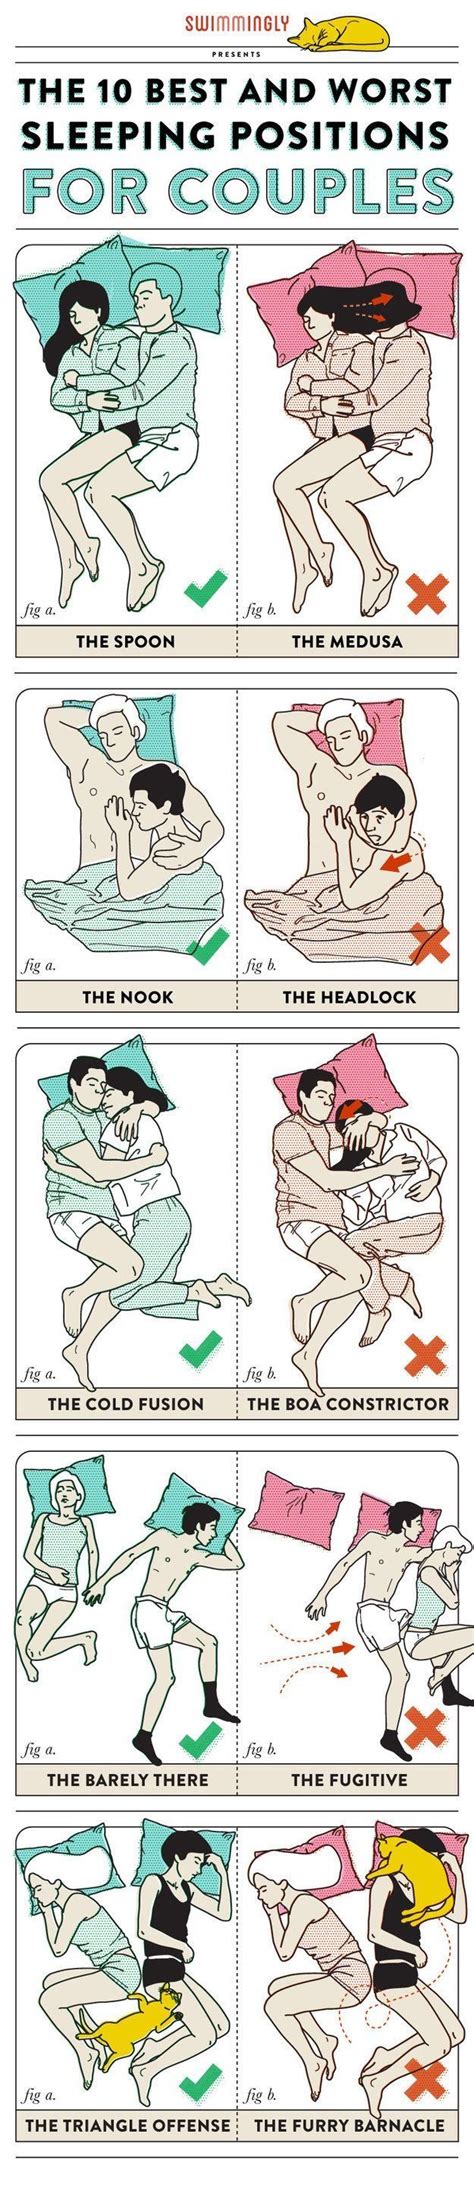 the 101 guide to couple sleeping positions and it s meaning